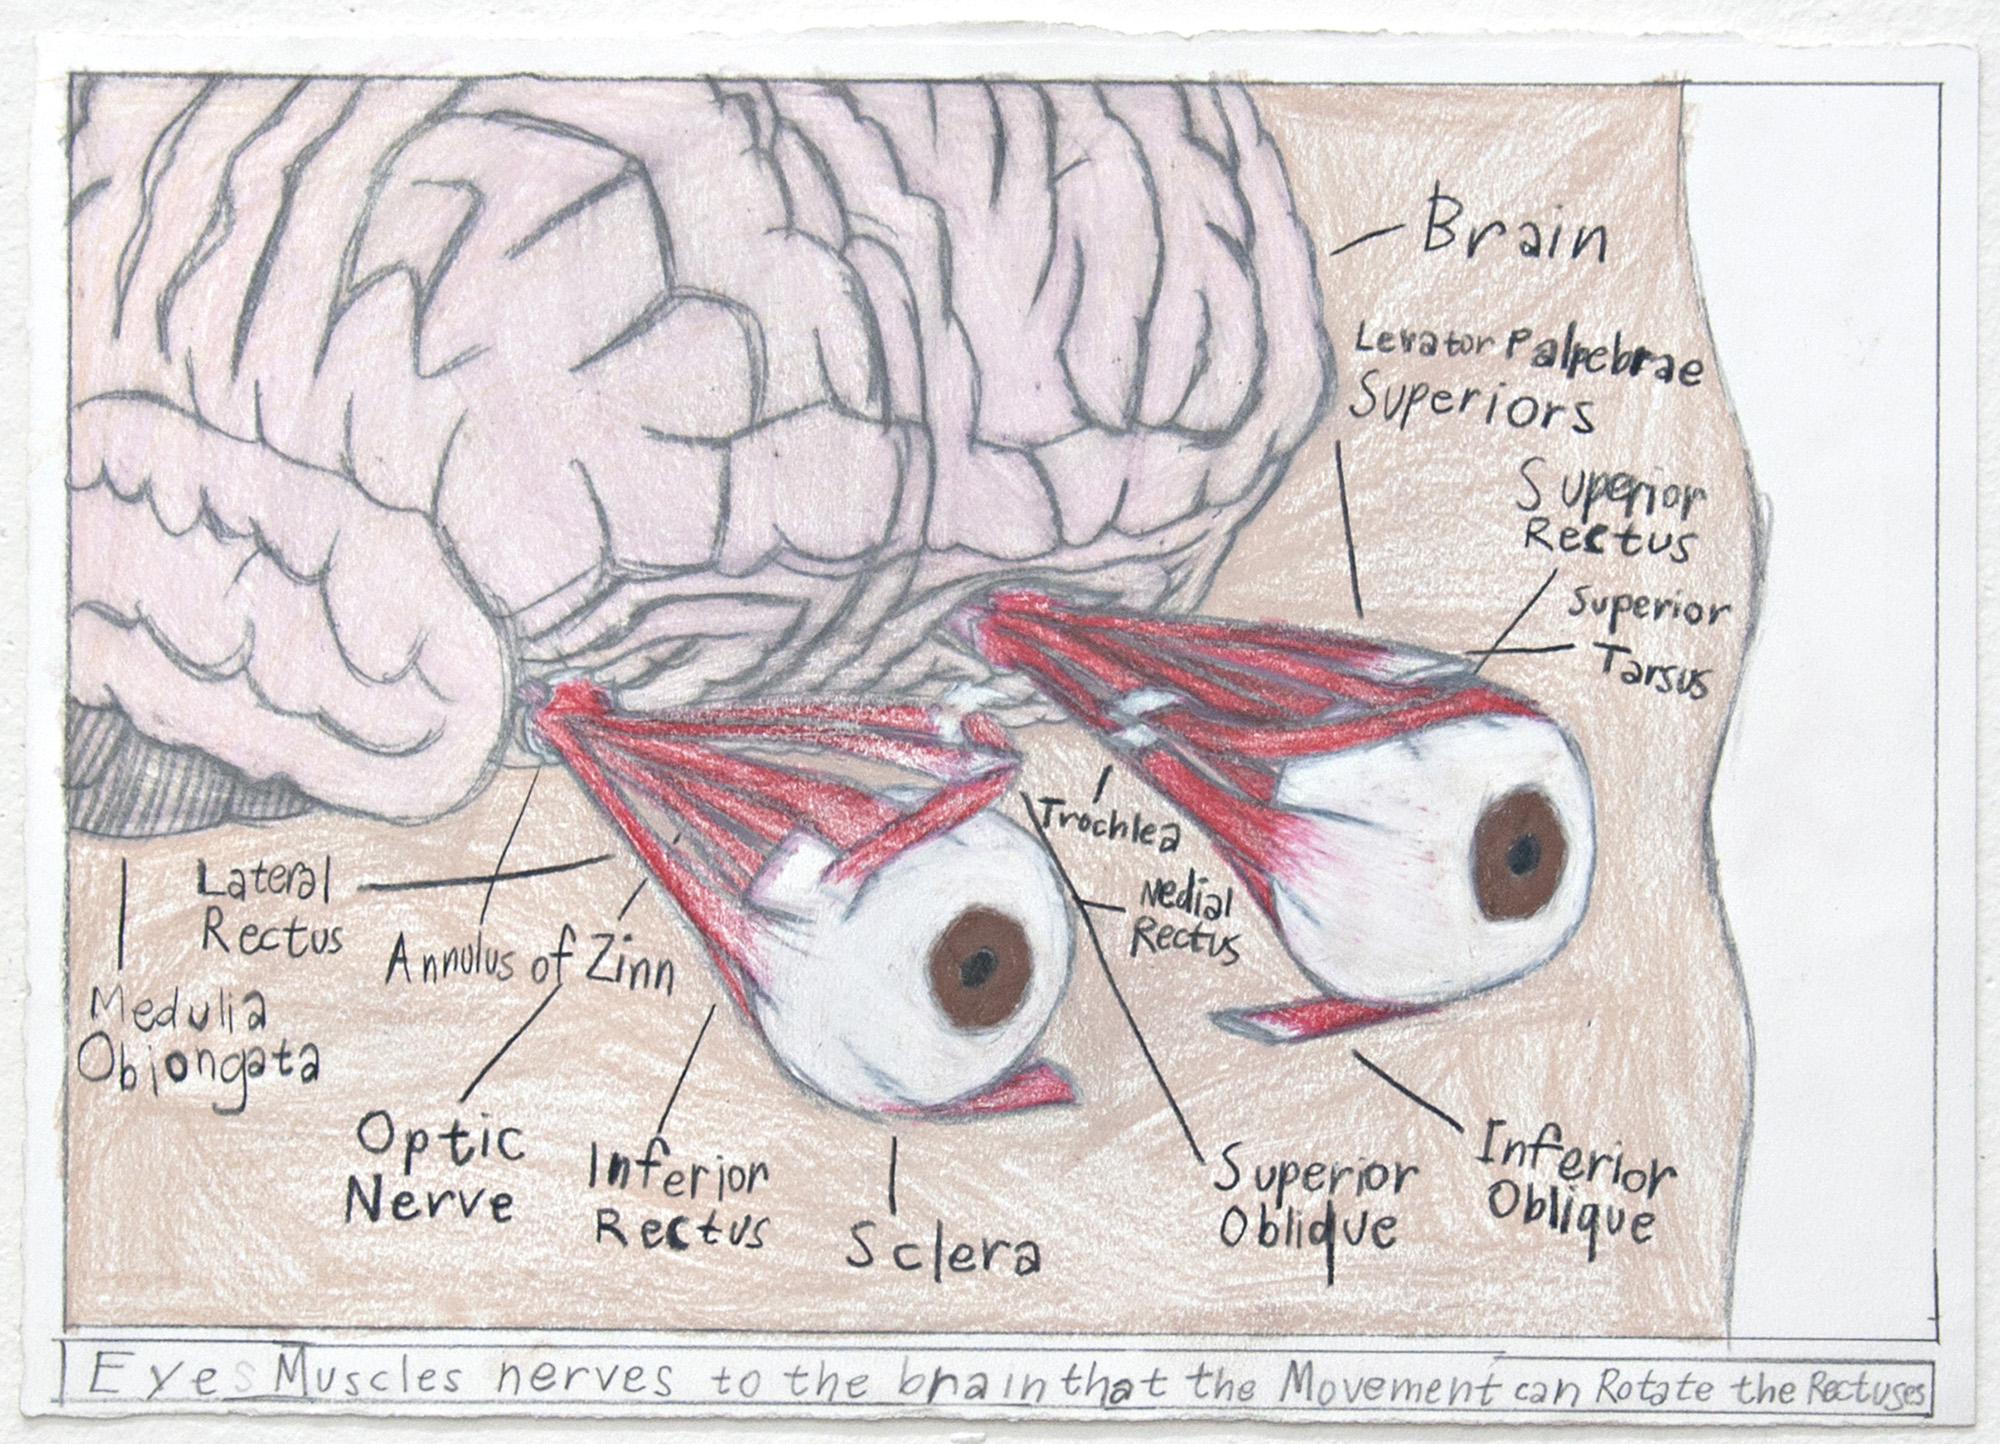 Samraing Chea, <em>Eye Muscles Nerves to the brain that the Movement can Rotate the Rectuses</em>, 2014, pencil on paper, 25 × 35 cm, courtesy the artist and Arts Project Australia. Photo: Andrew Curtis.